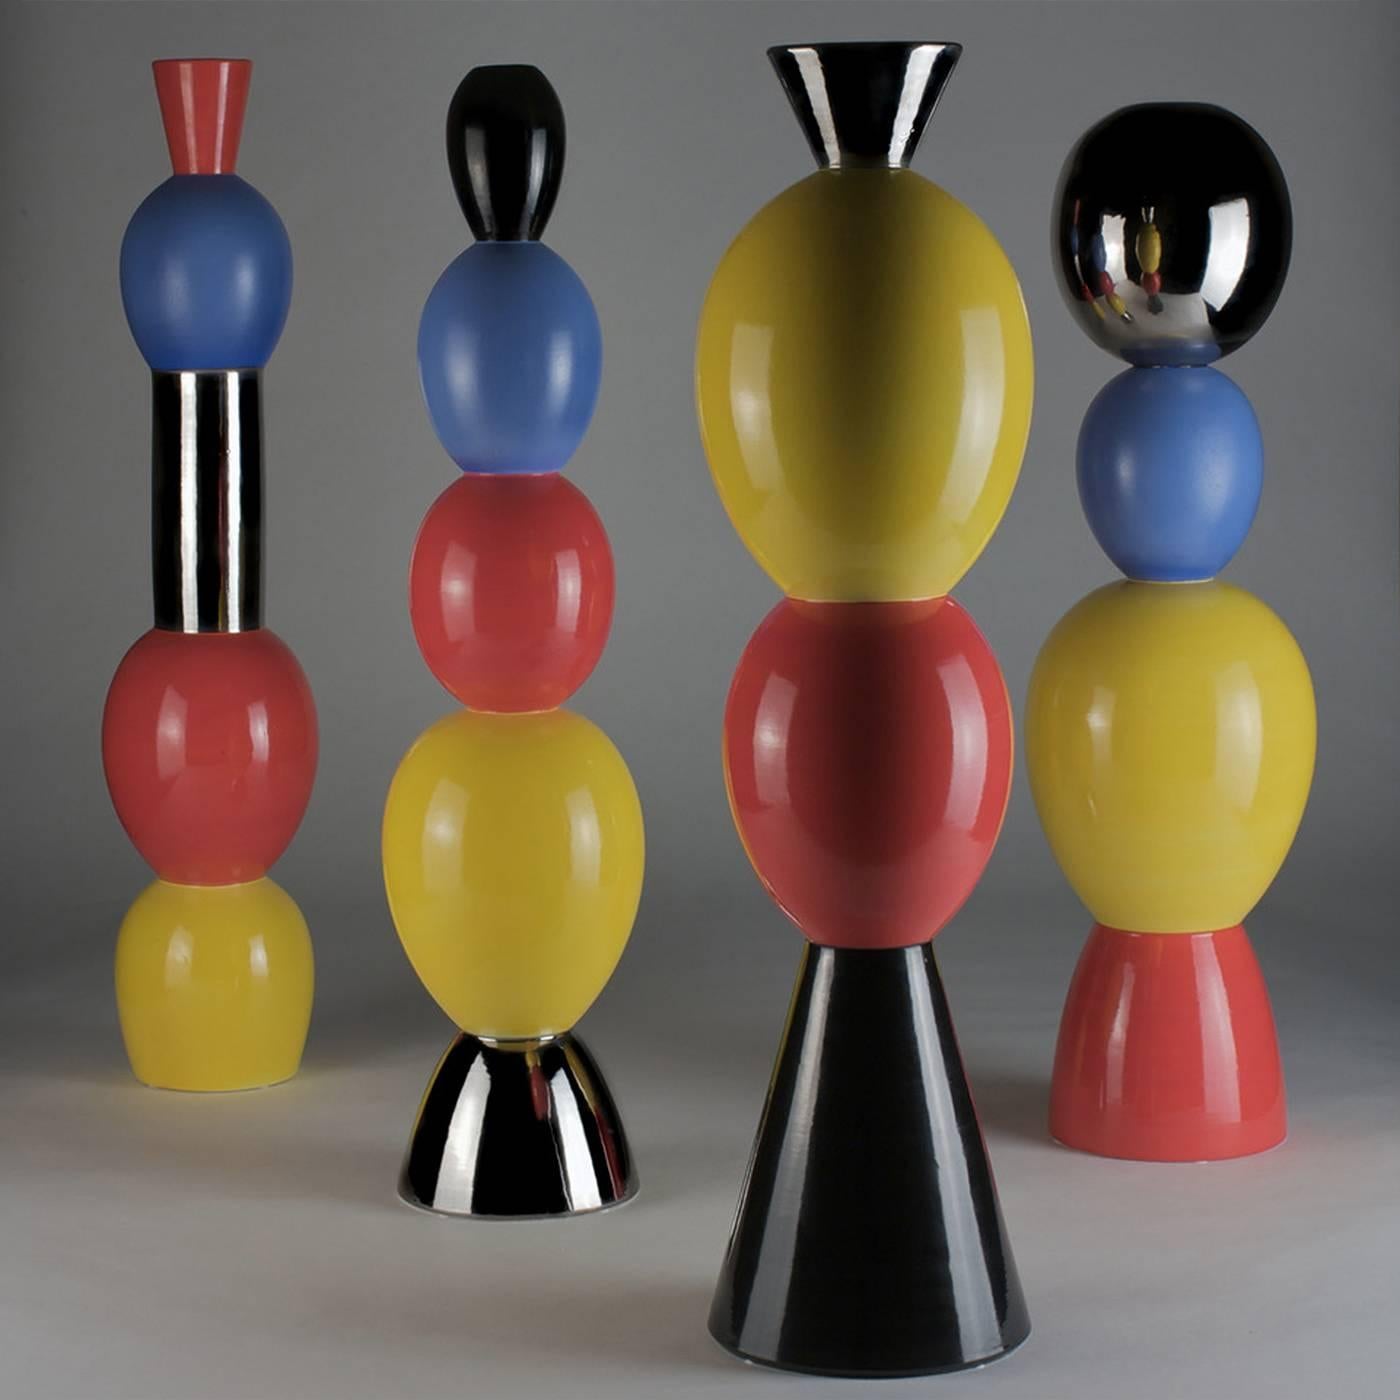 Designed for Superego by Alessandro Mendini, this decorative sculpture is made entirely in ceramic and is part of a collection of 12 columns, each produced in a limited series of 50 pieces, all numbered and signed. This statuette will bring a touch